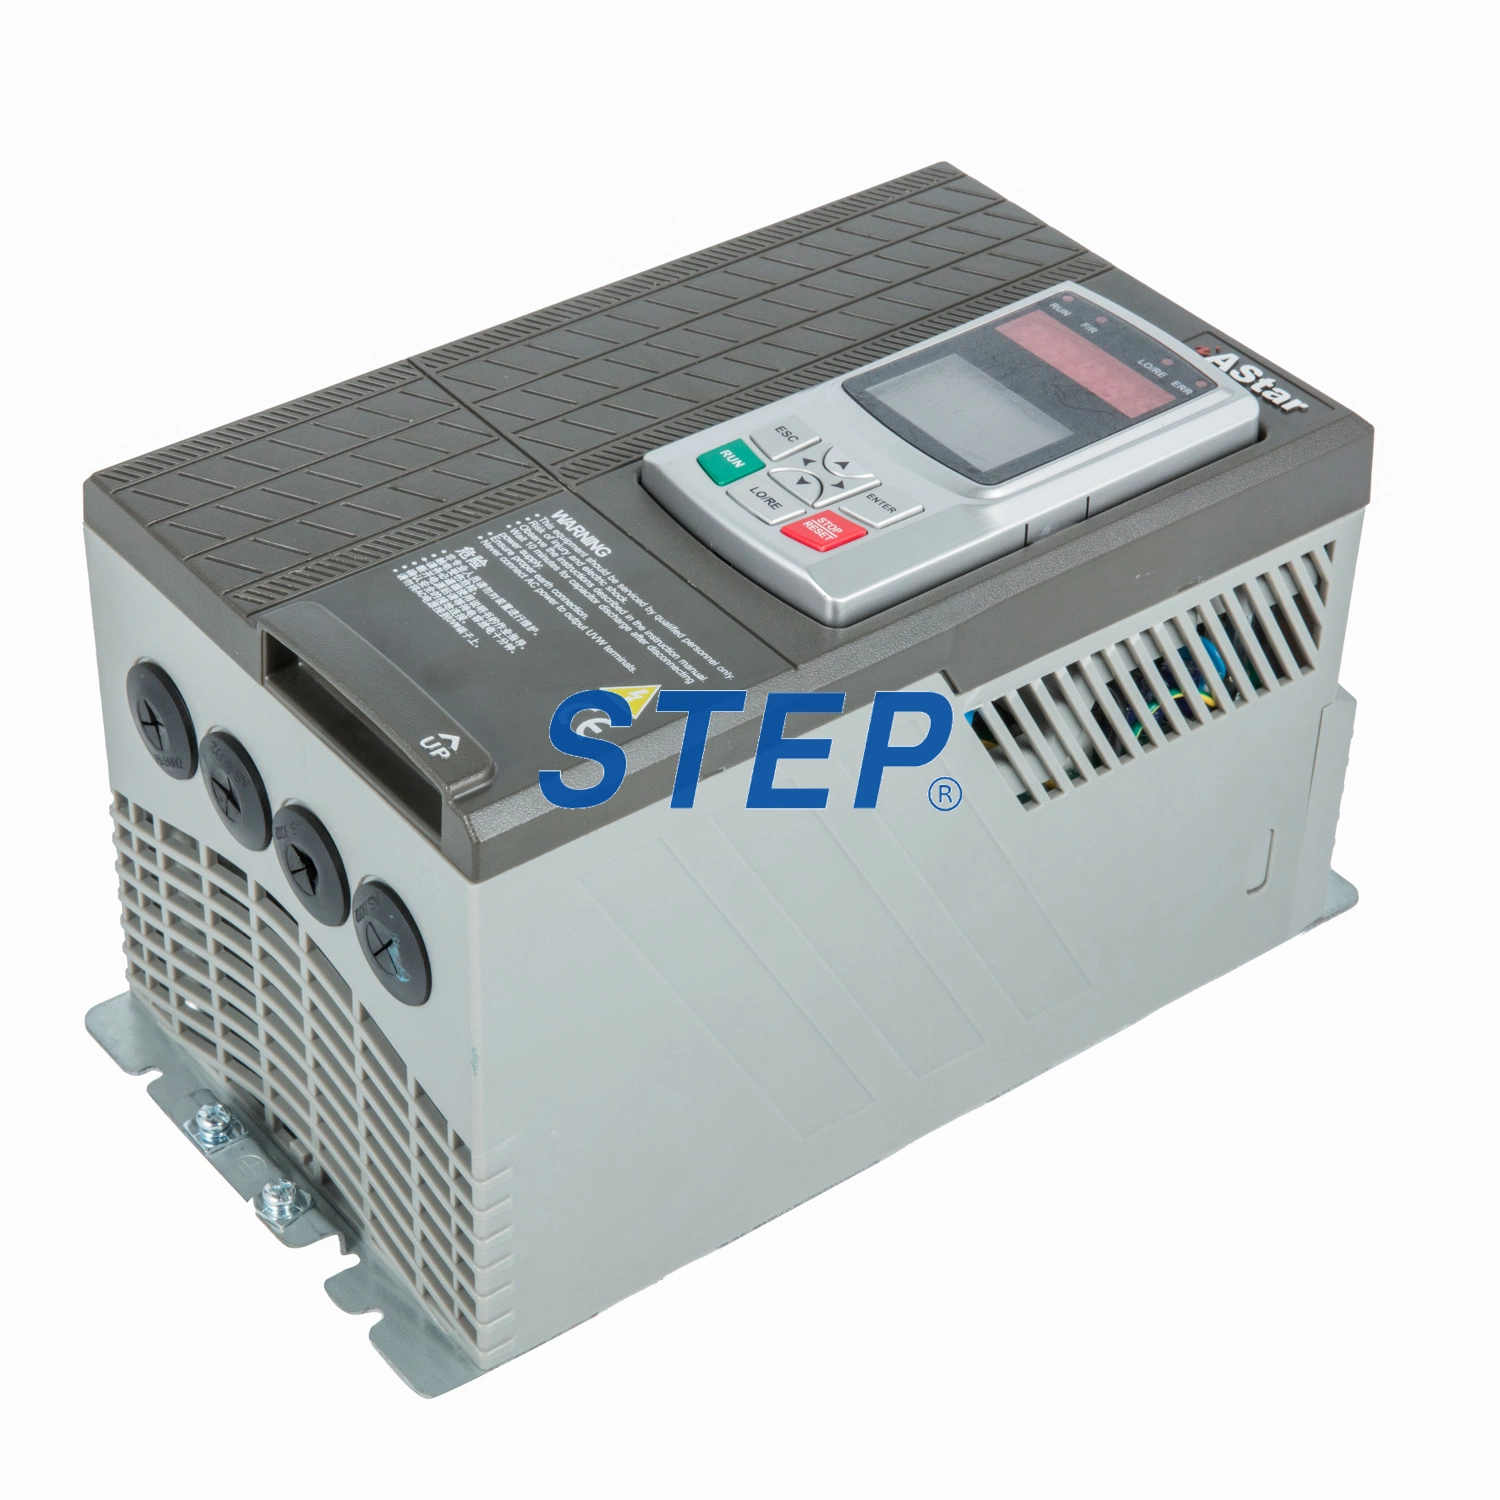 PWM Control vector vfd saver power inverters 7.5KW with Good Service AS5004T18P5